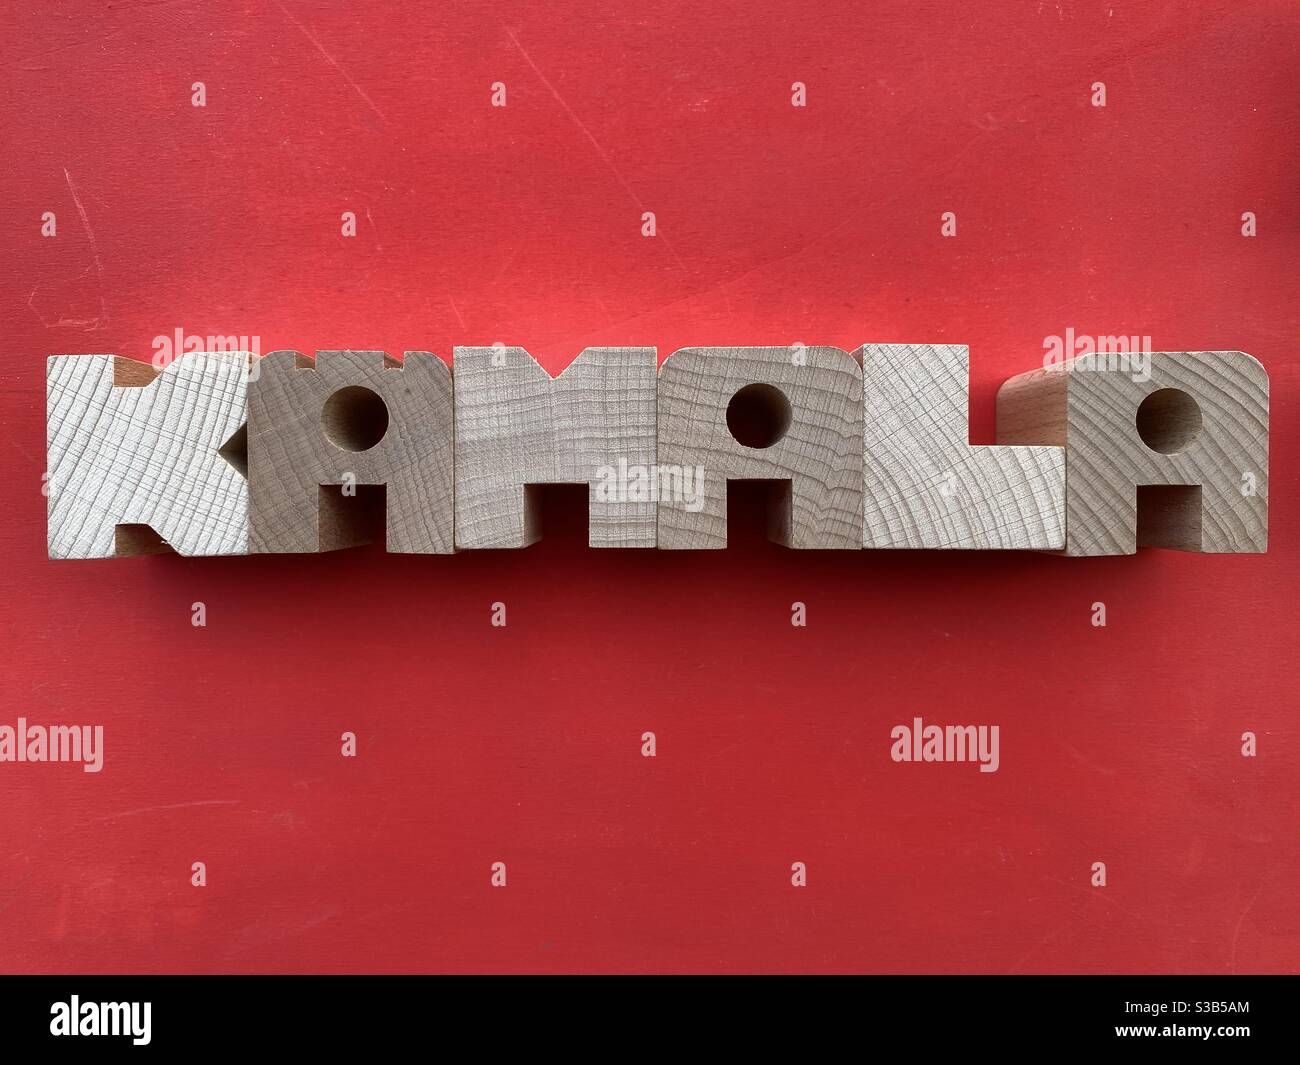 Kamala, female given name composed with wooden letters over red background Stock Photo